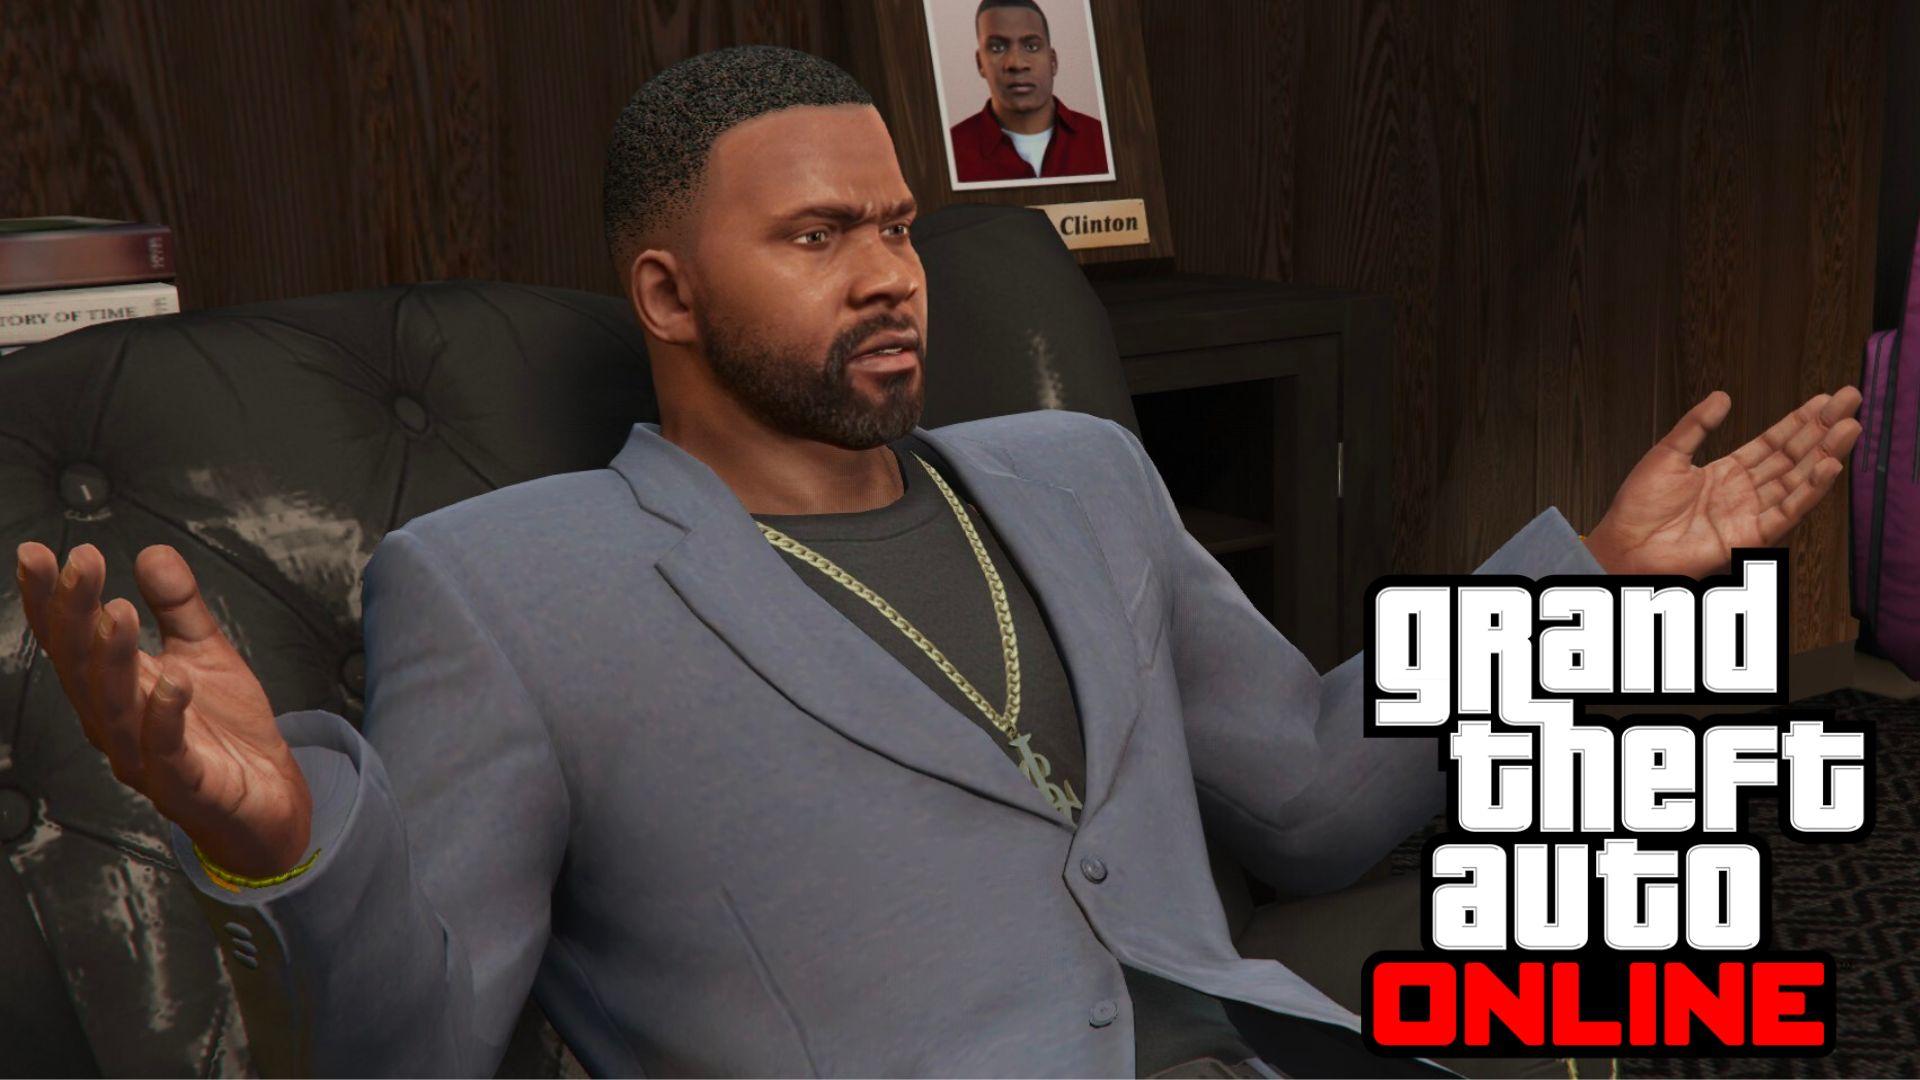 Franklin in GTA online wearing a suit with arms out wide